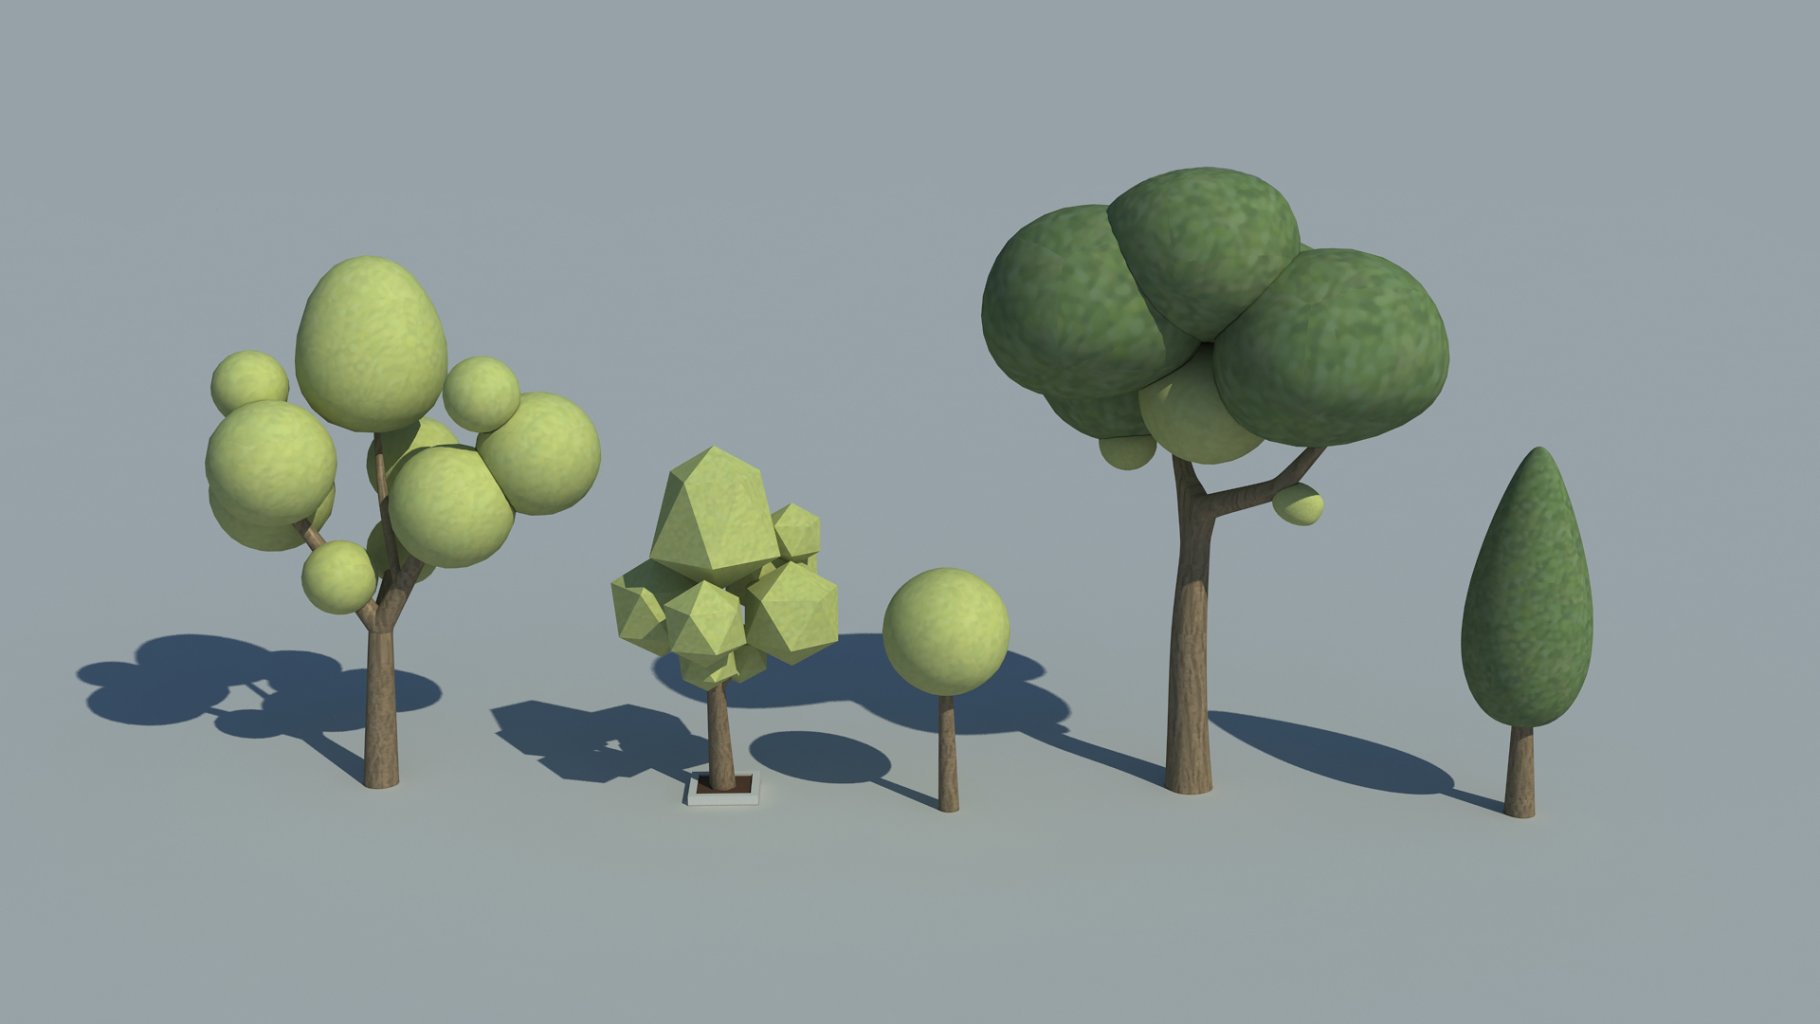 Rendering an enchanting low poly 3d model of trees